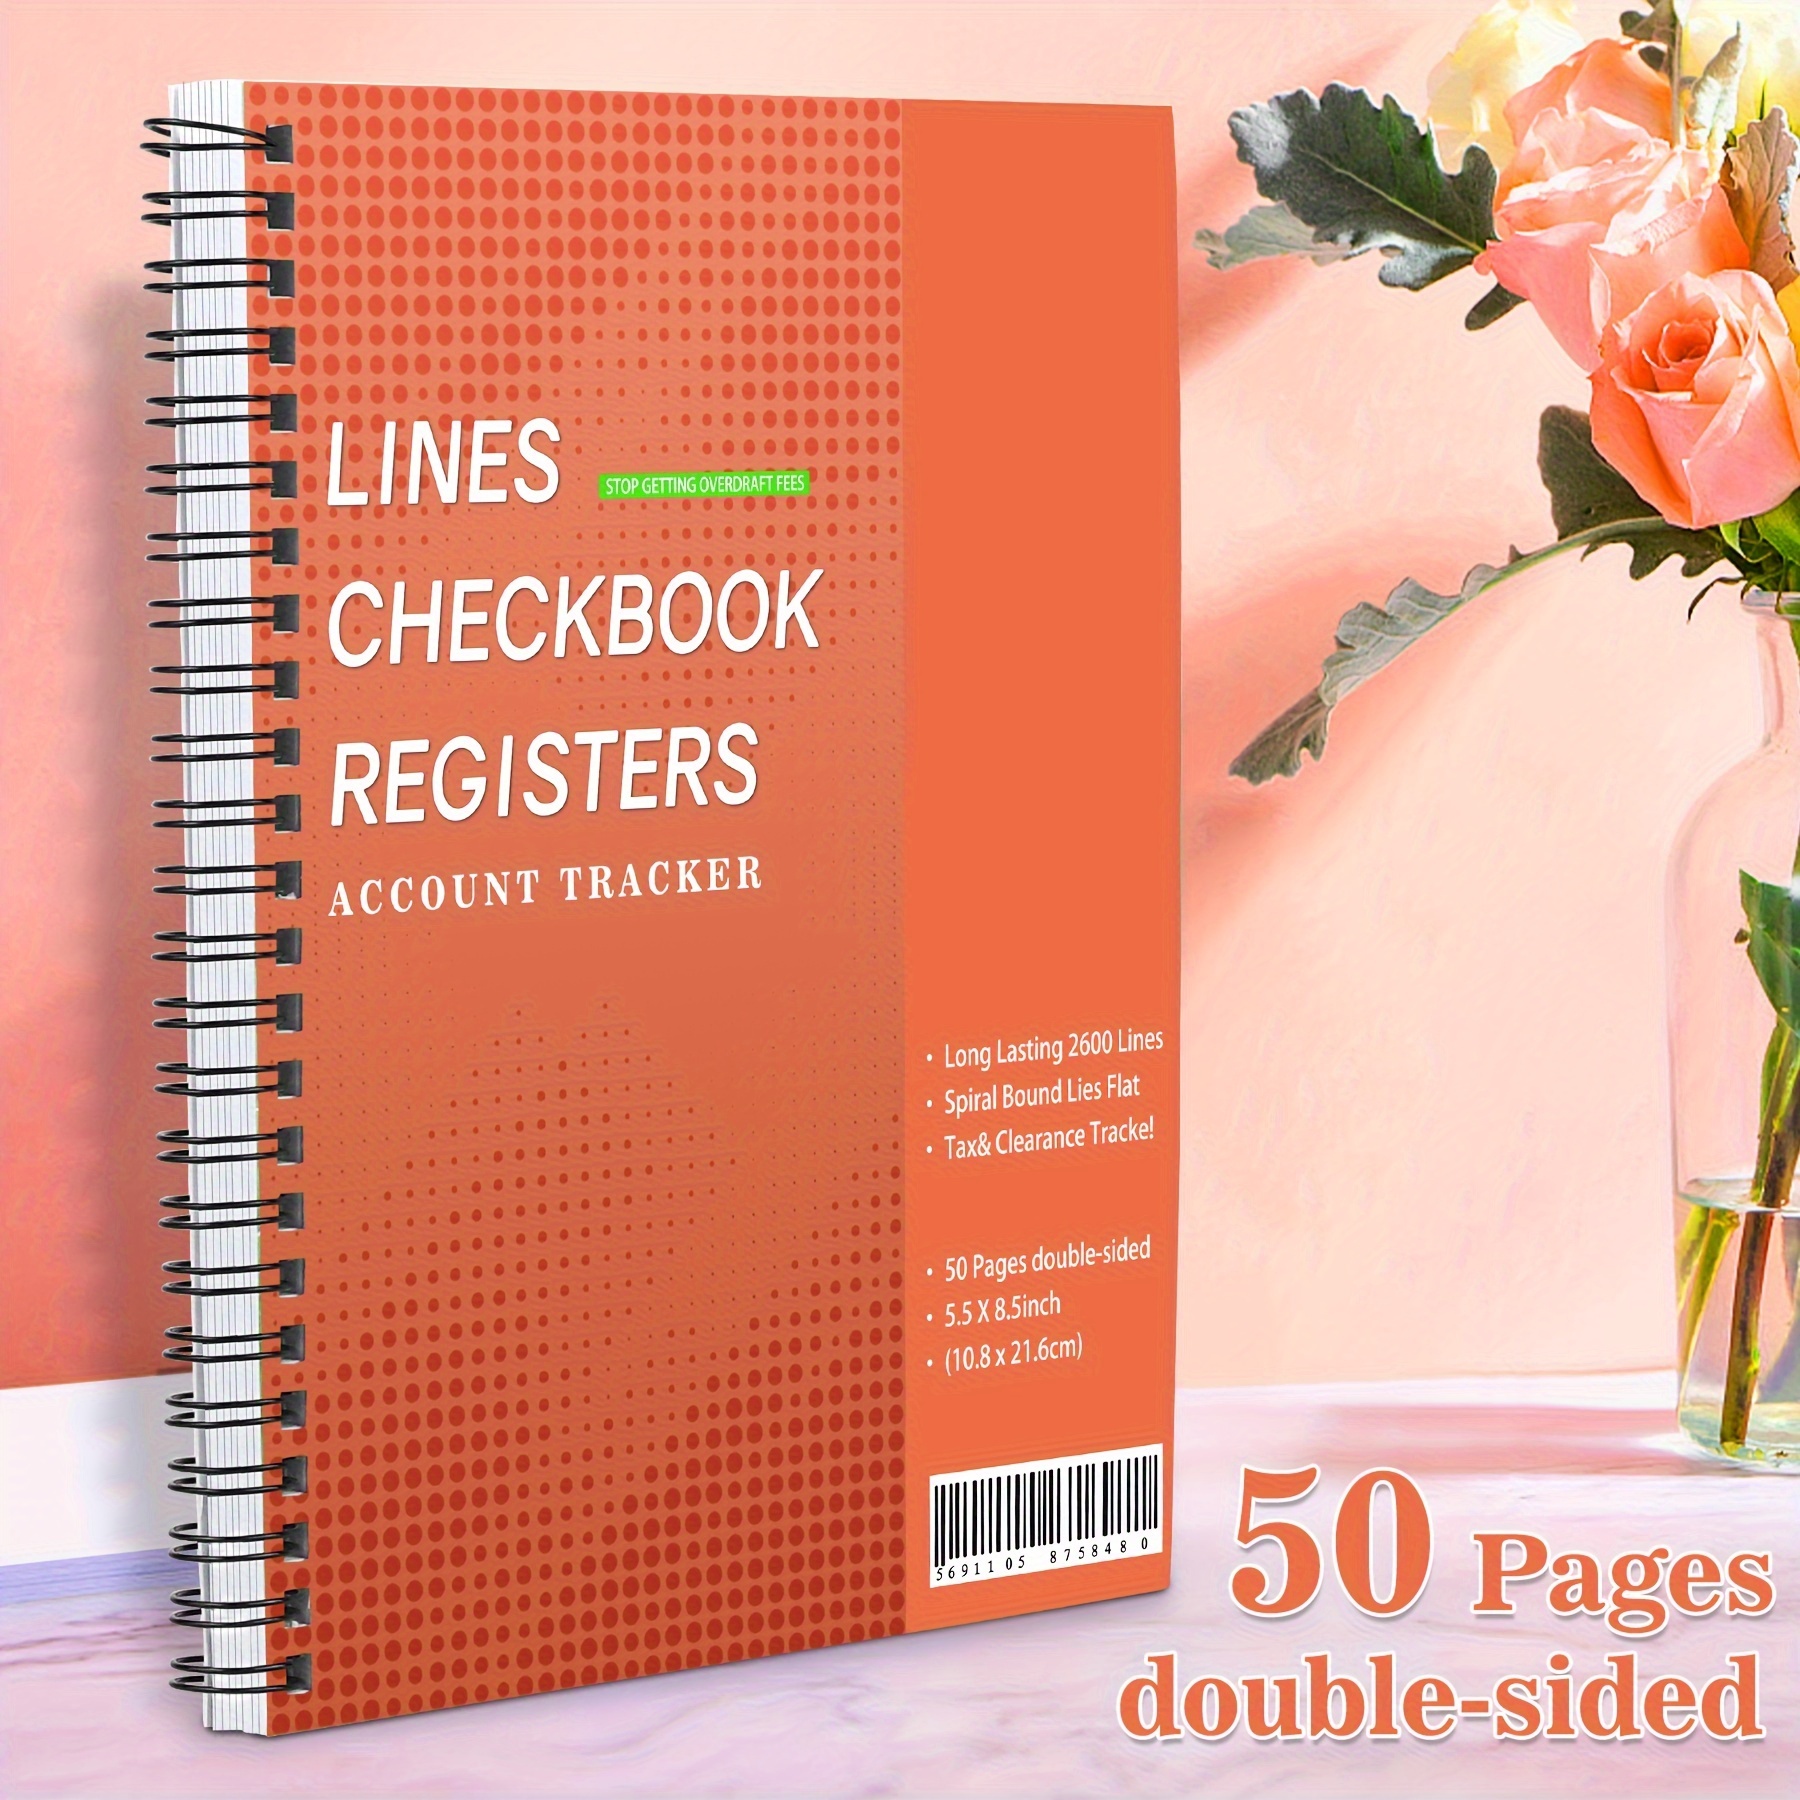 

Lines Checkbook Registers Account - 100 Pages, Upgraded Thick Paper, 5.5x8.5 Inches, Accounting Journal For Small Business & Personal Use, Track Accounts, Deposits, Expenses & Balances